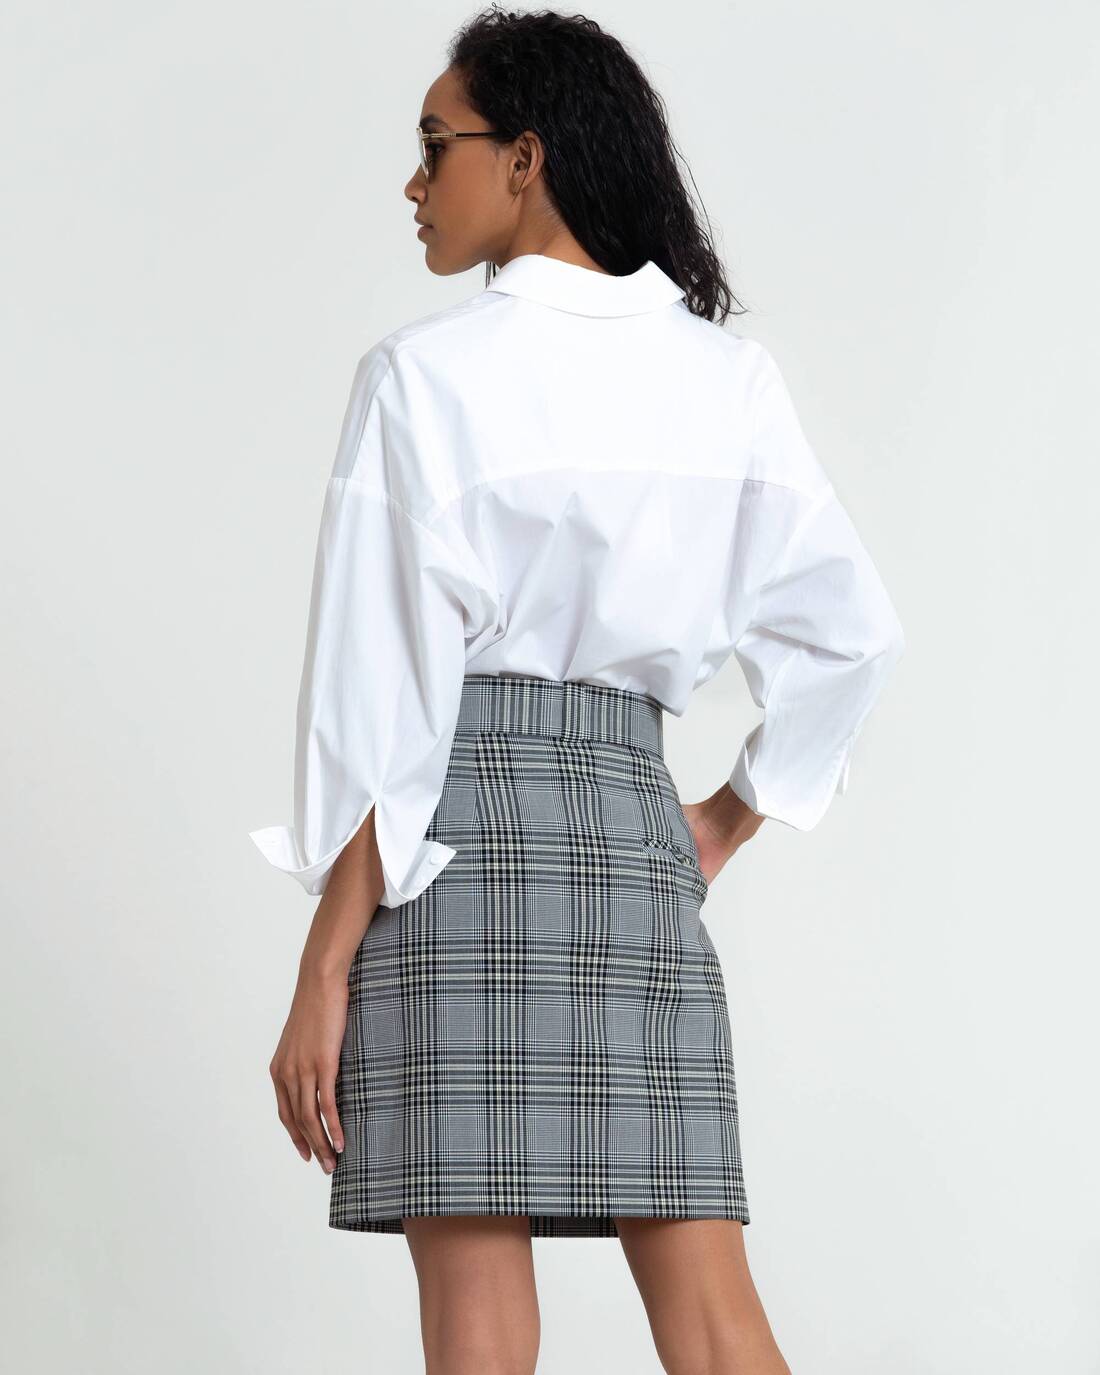 Oversize shirt with pockets